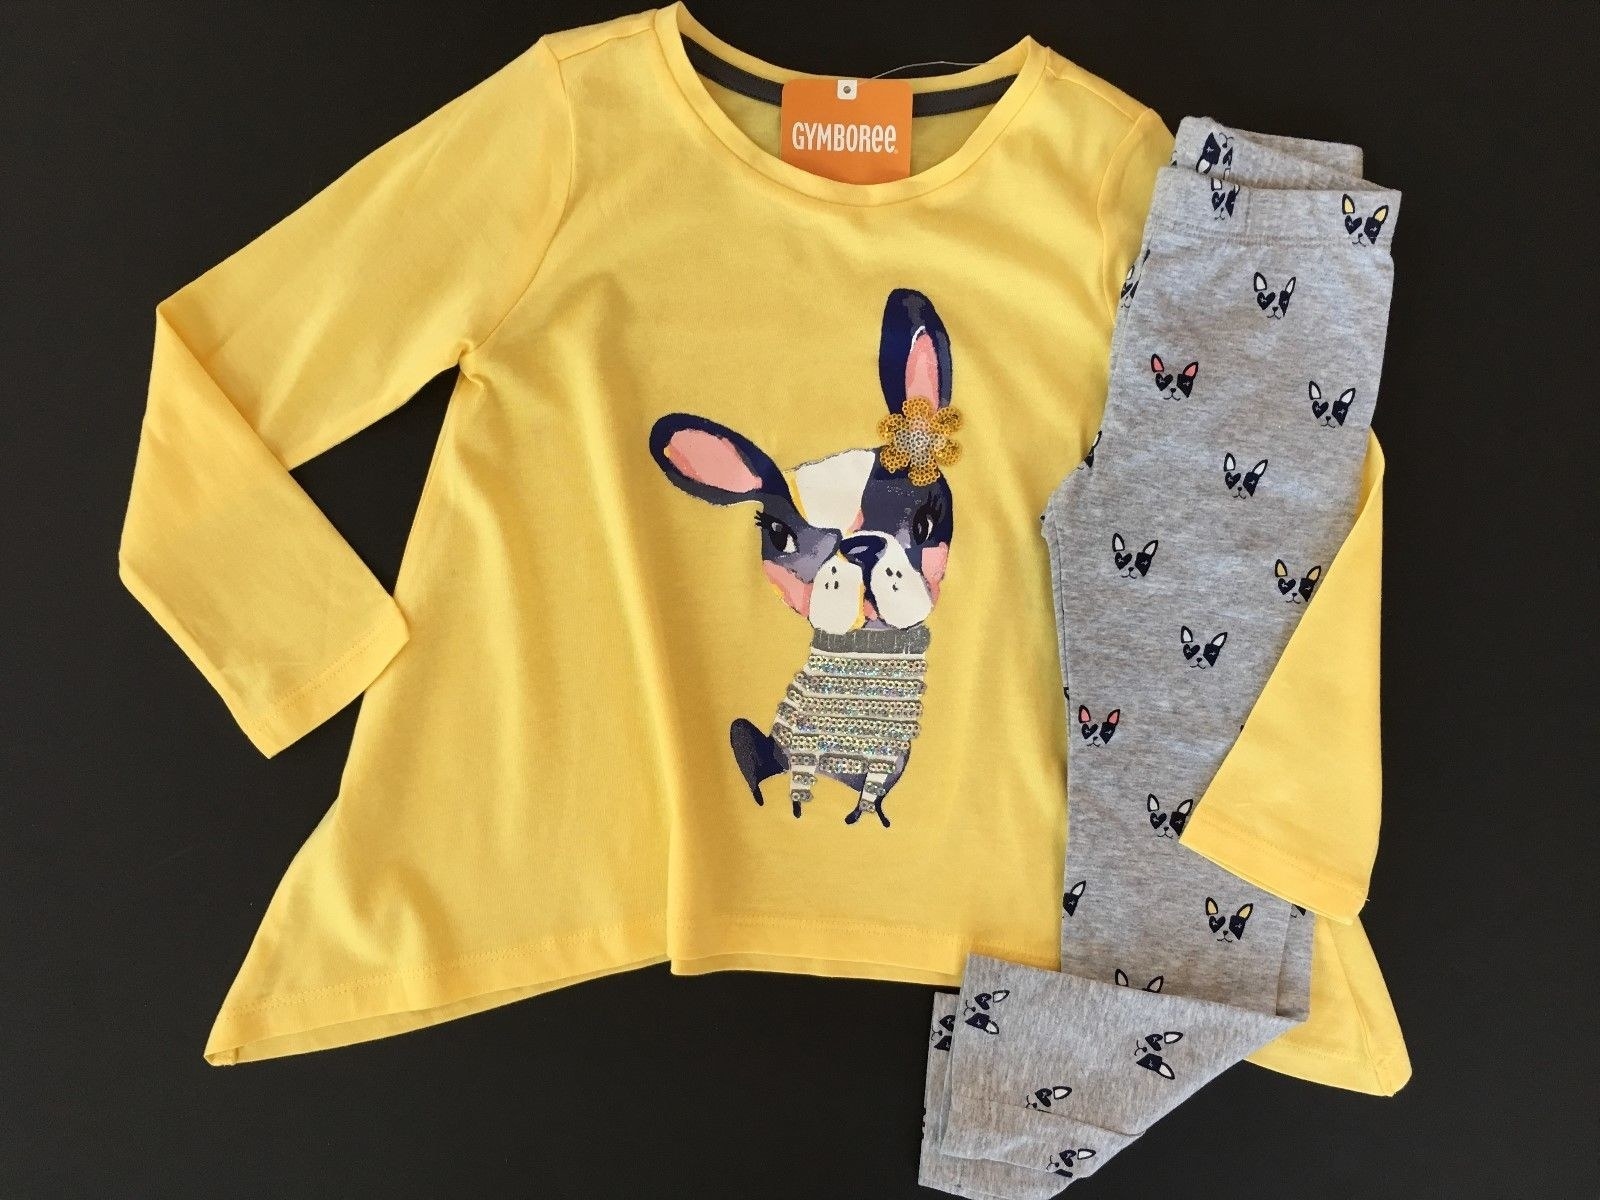 Gymboree has relaunched, and it's time to stock up on cute kids' clothes!